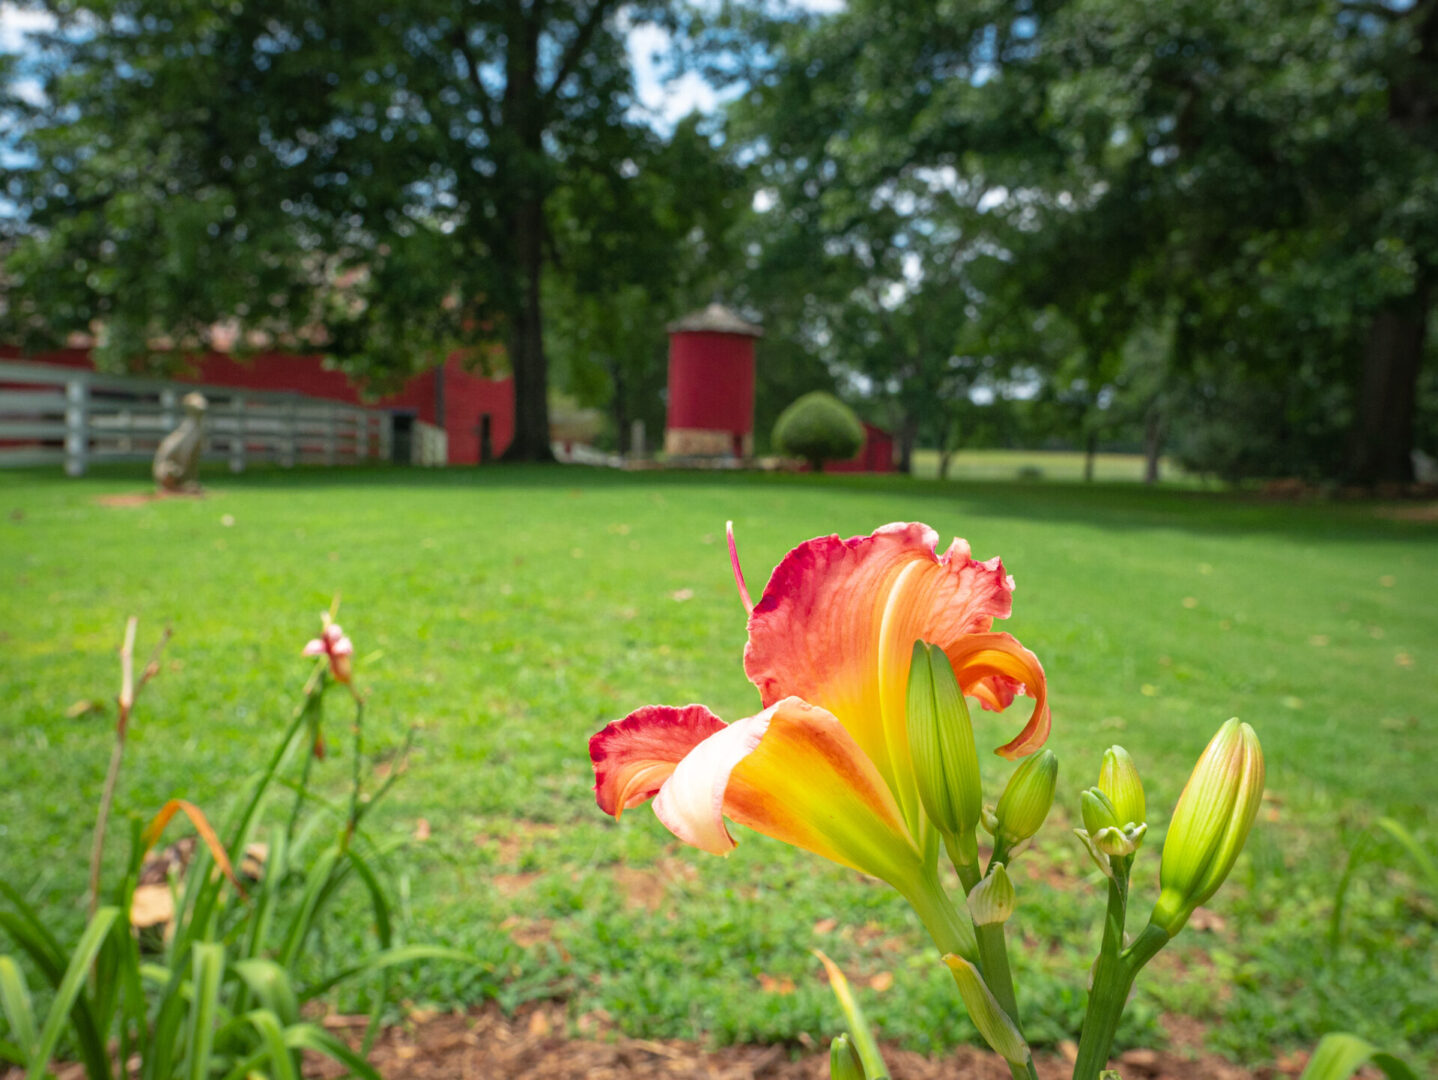 Flowers and yard in events venue at Serenata Farm in Madison, GA